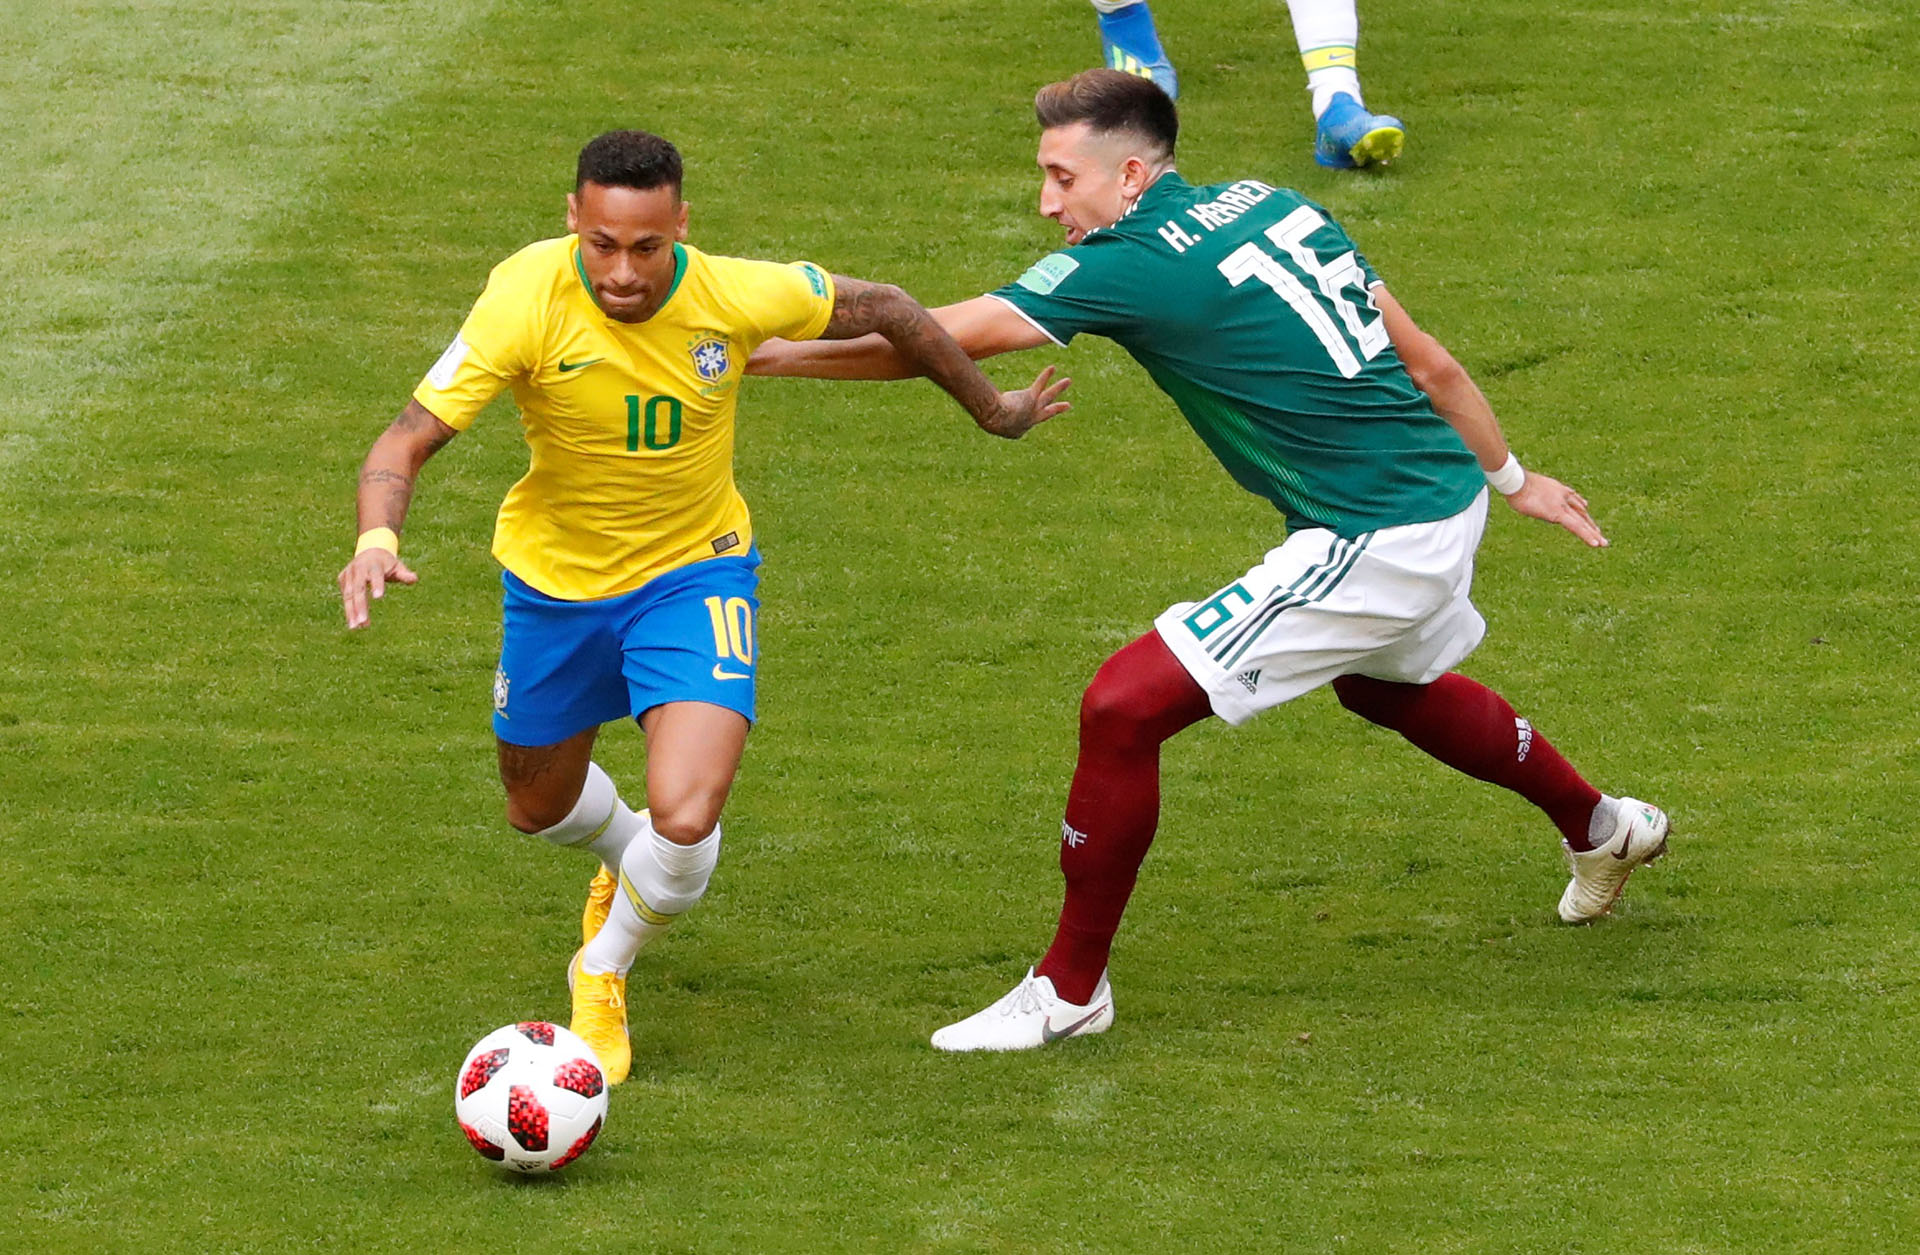 Brazil and Mexico face off in Samara